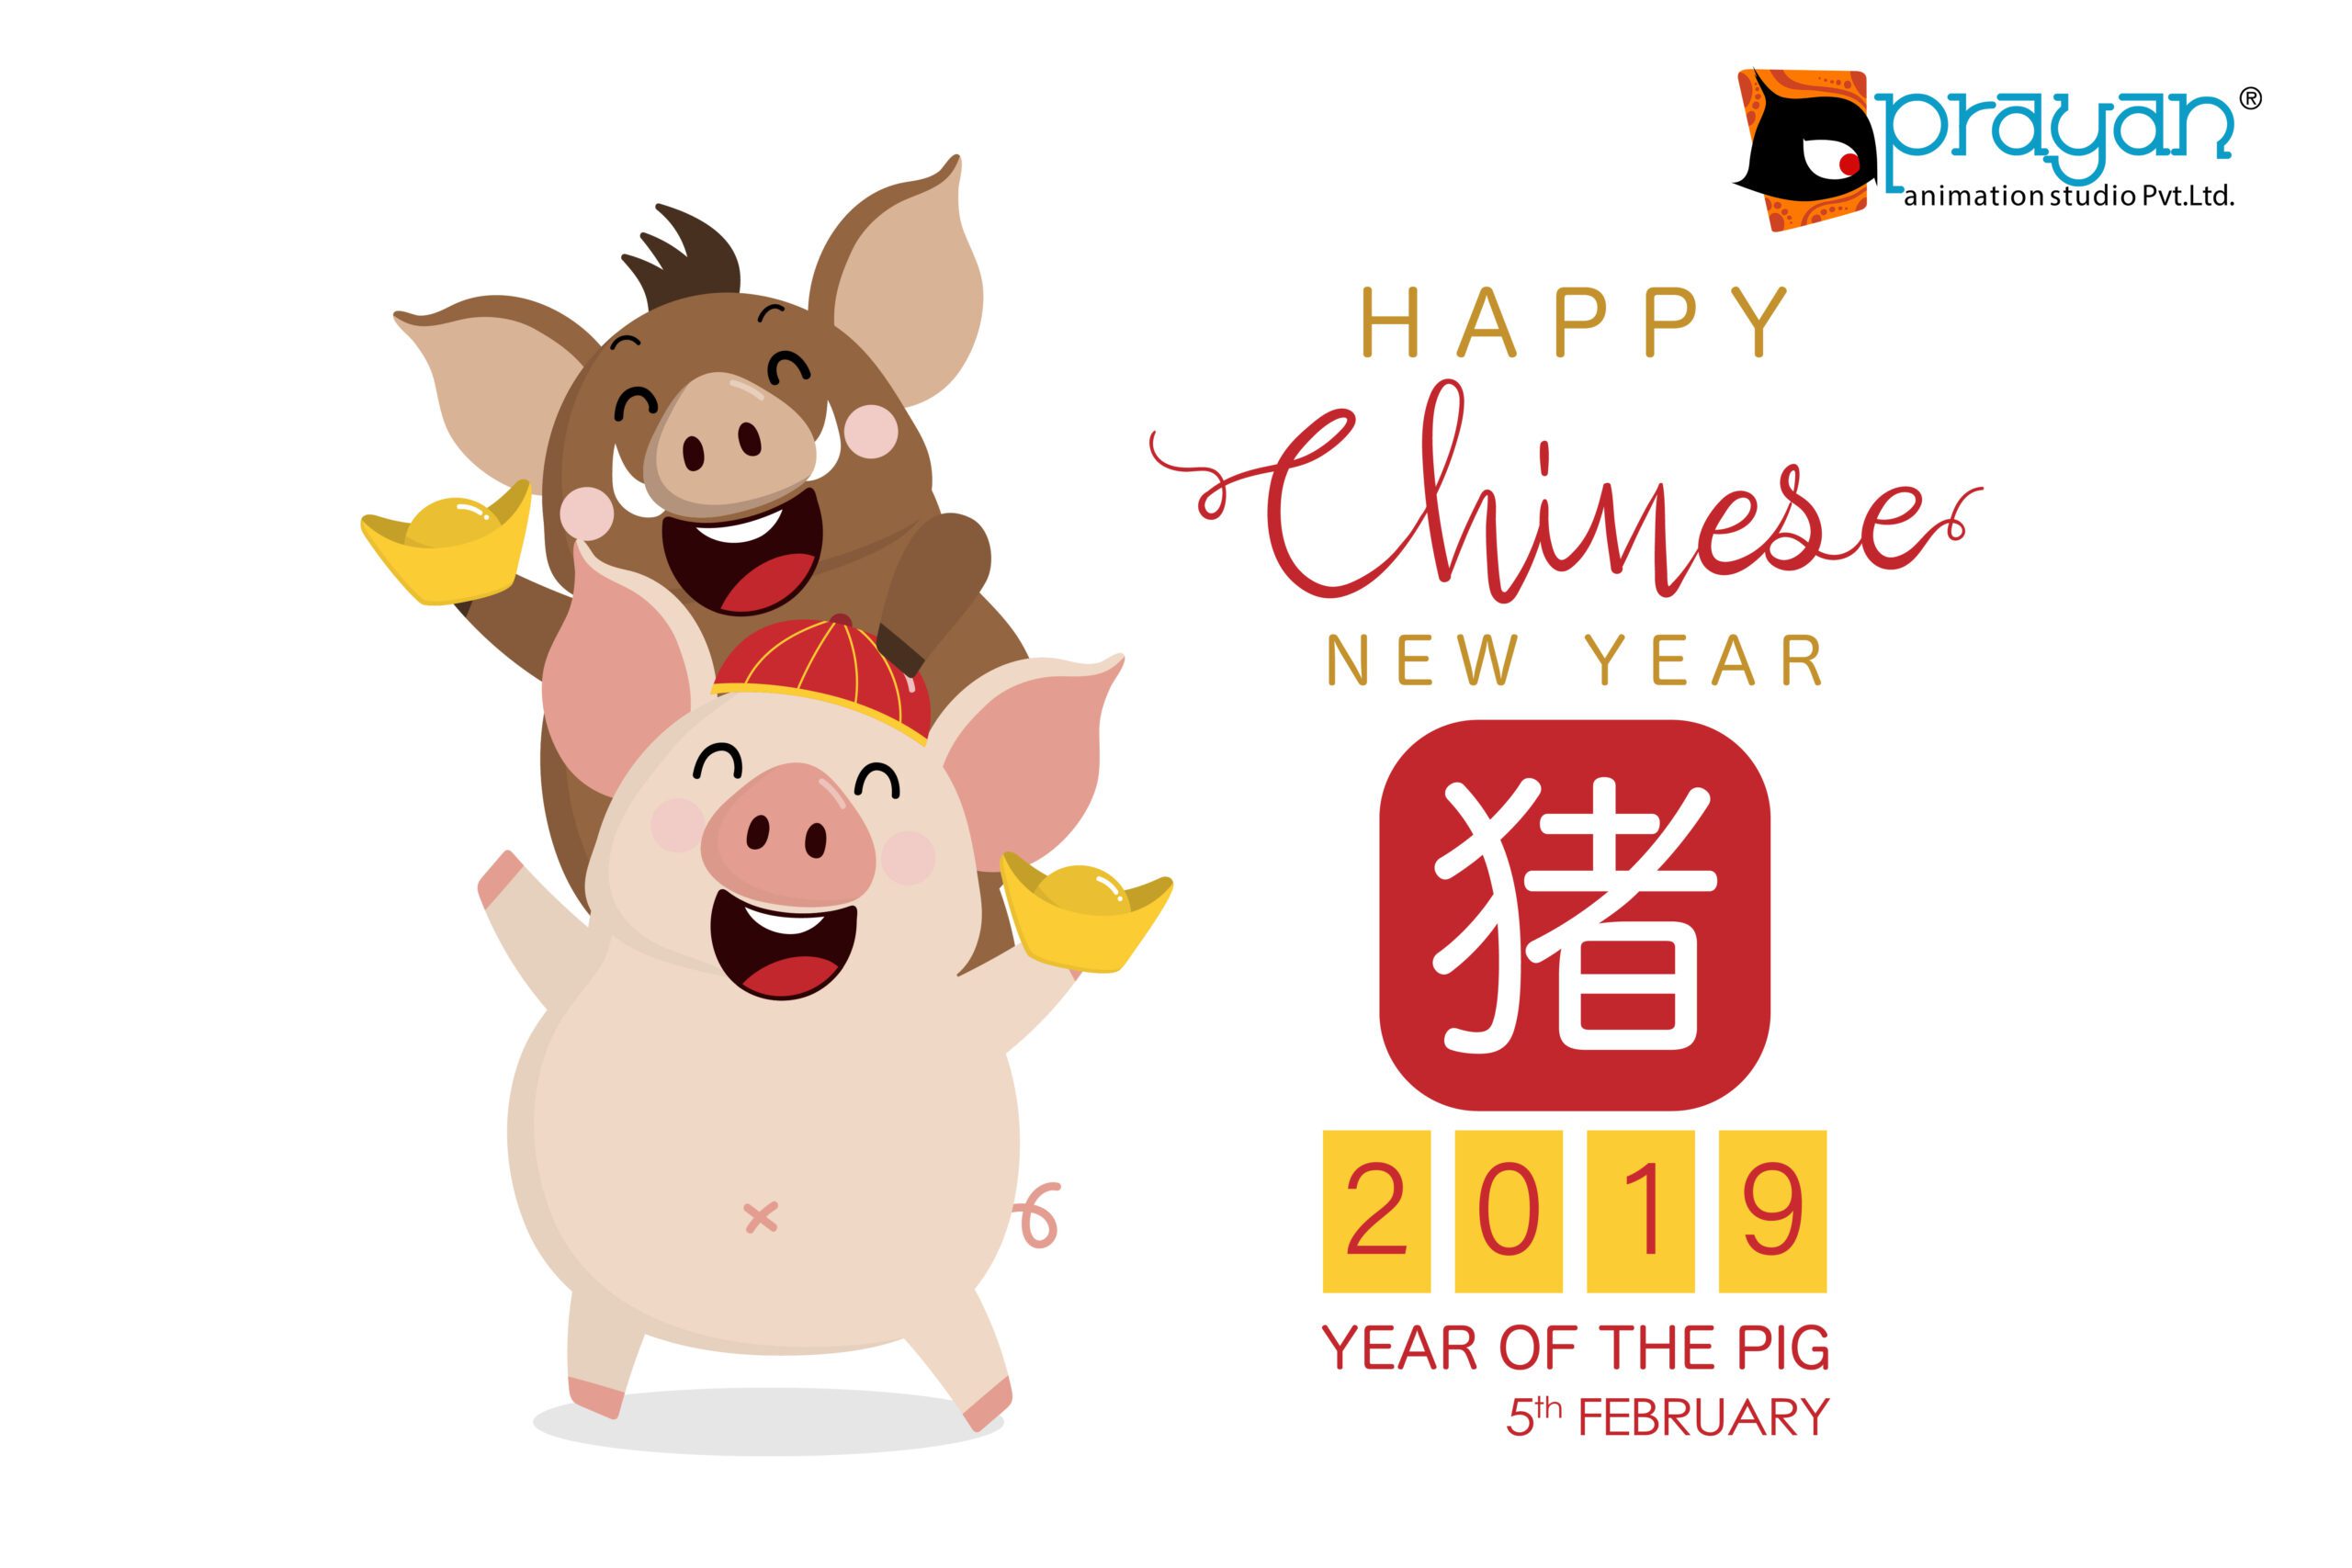 Chinese New Year 2019: Facts, Sayings to Celebrate the Year of the Pig